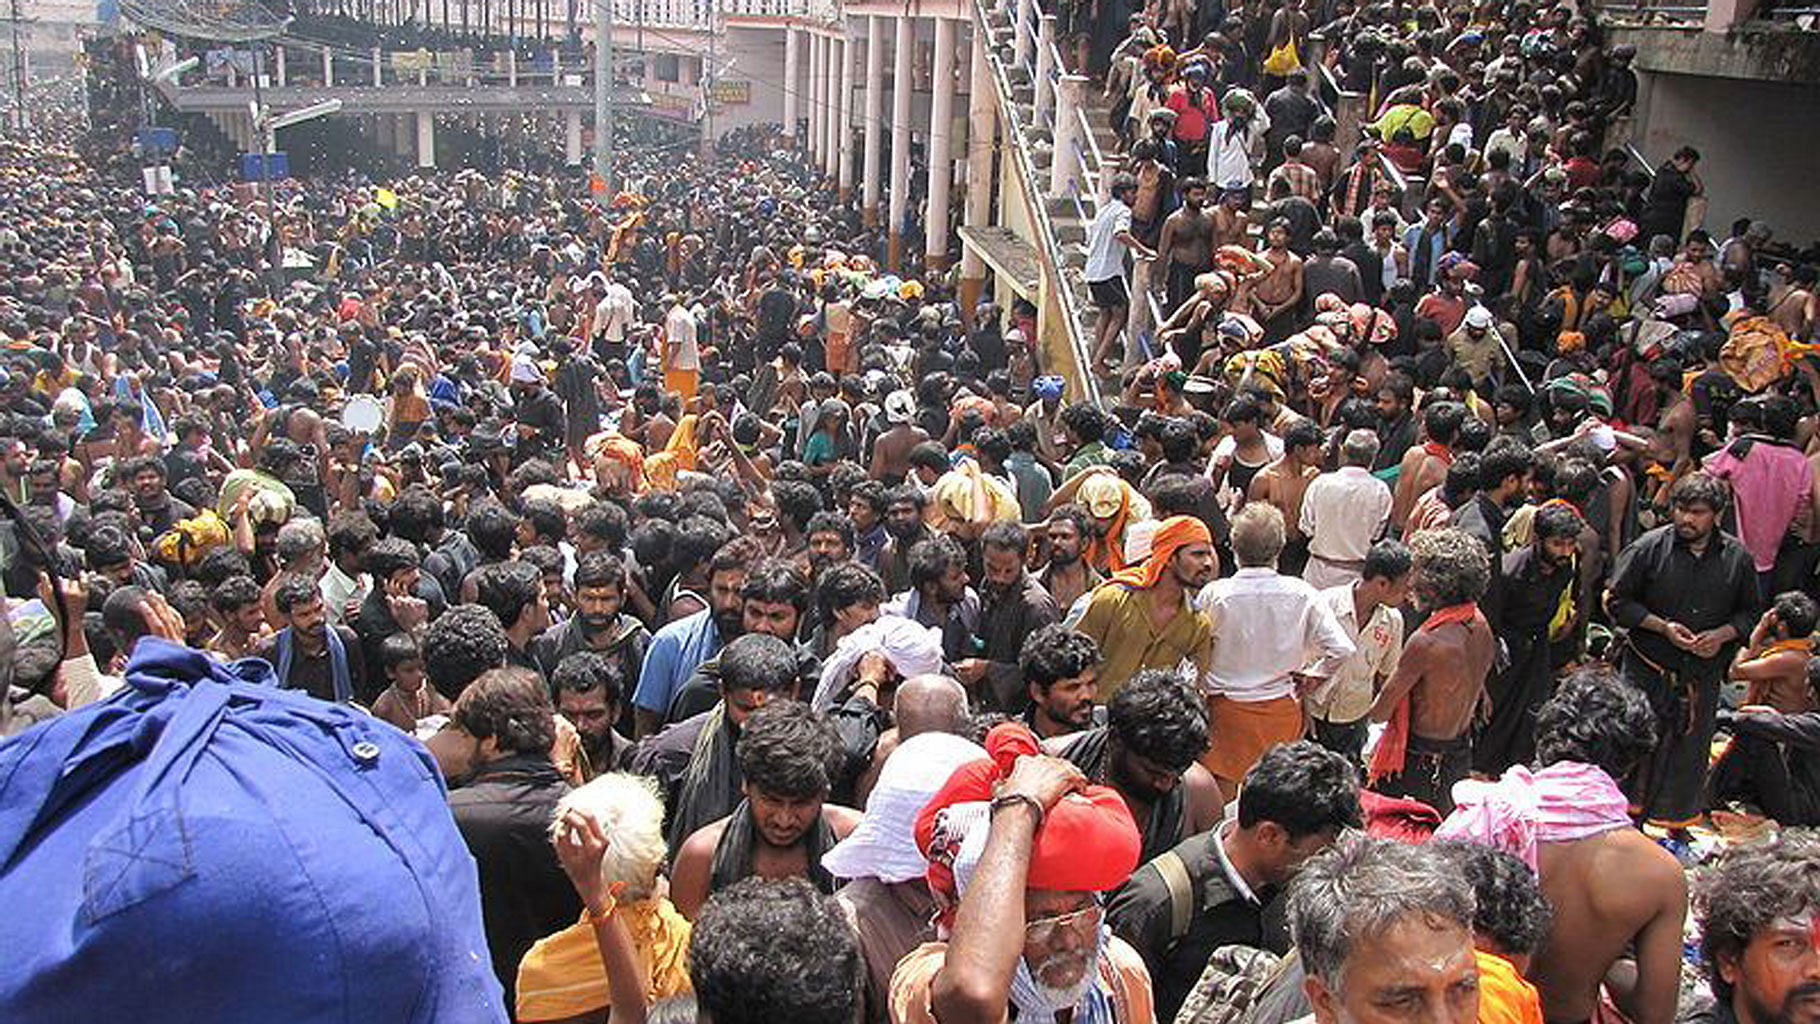 Devotees wait to enter the Sabarimala Temple. (Photo Courtesy: The News Minute)